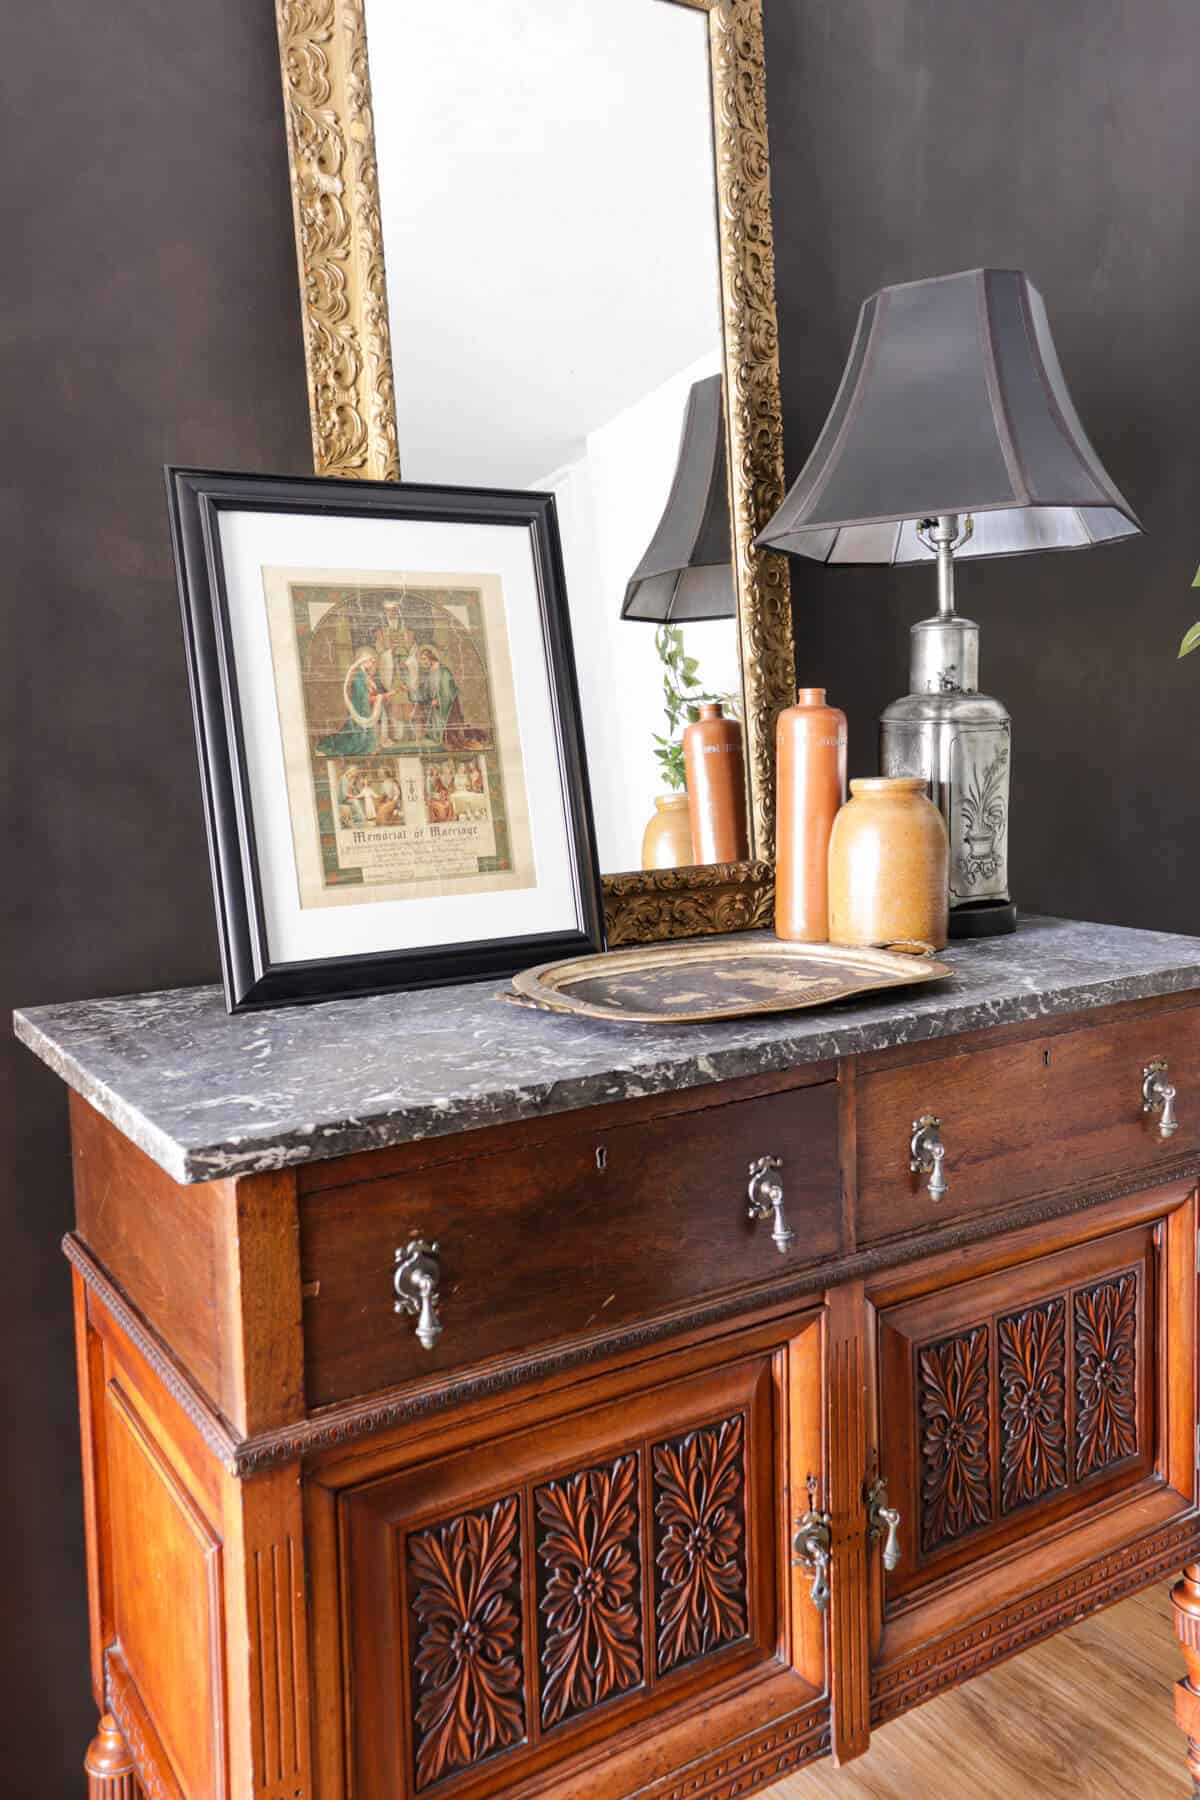 vintage carved chest with heirlooms decorating the top